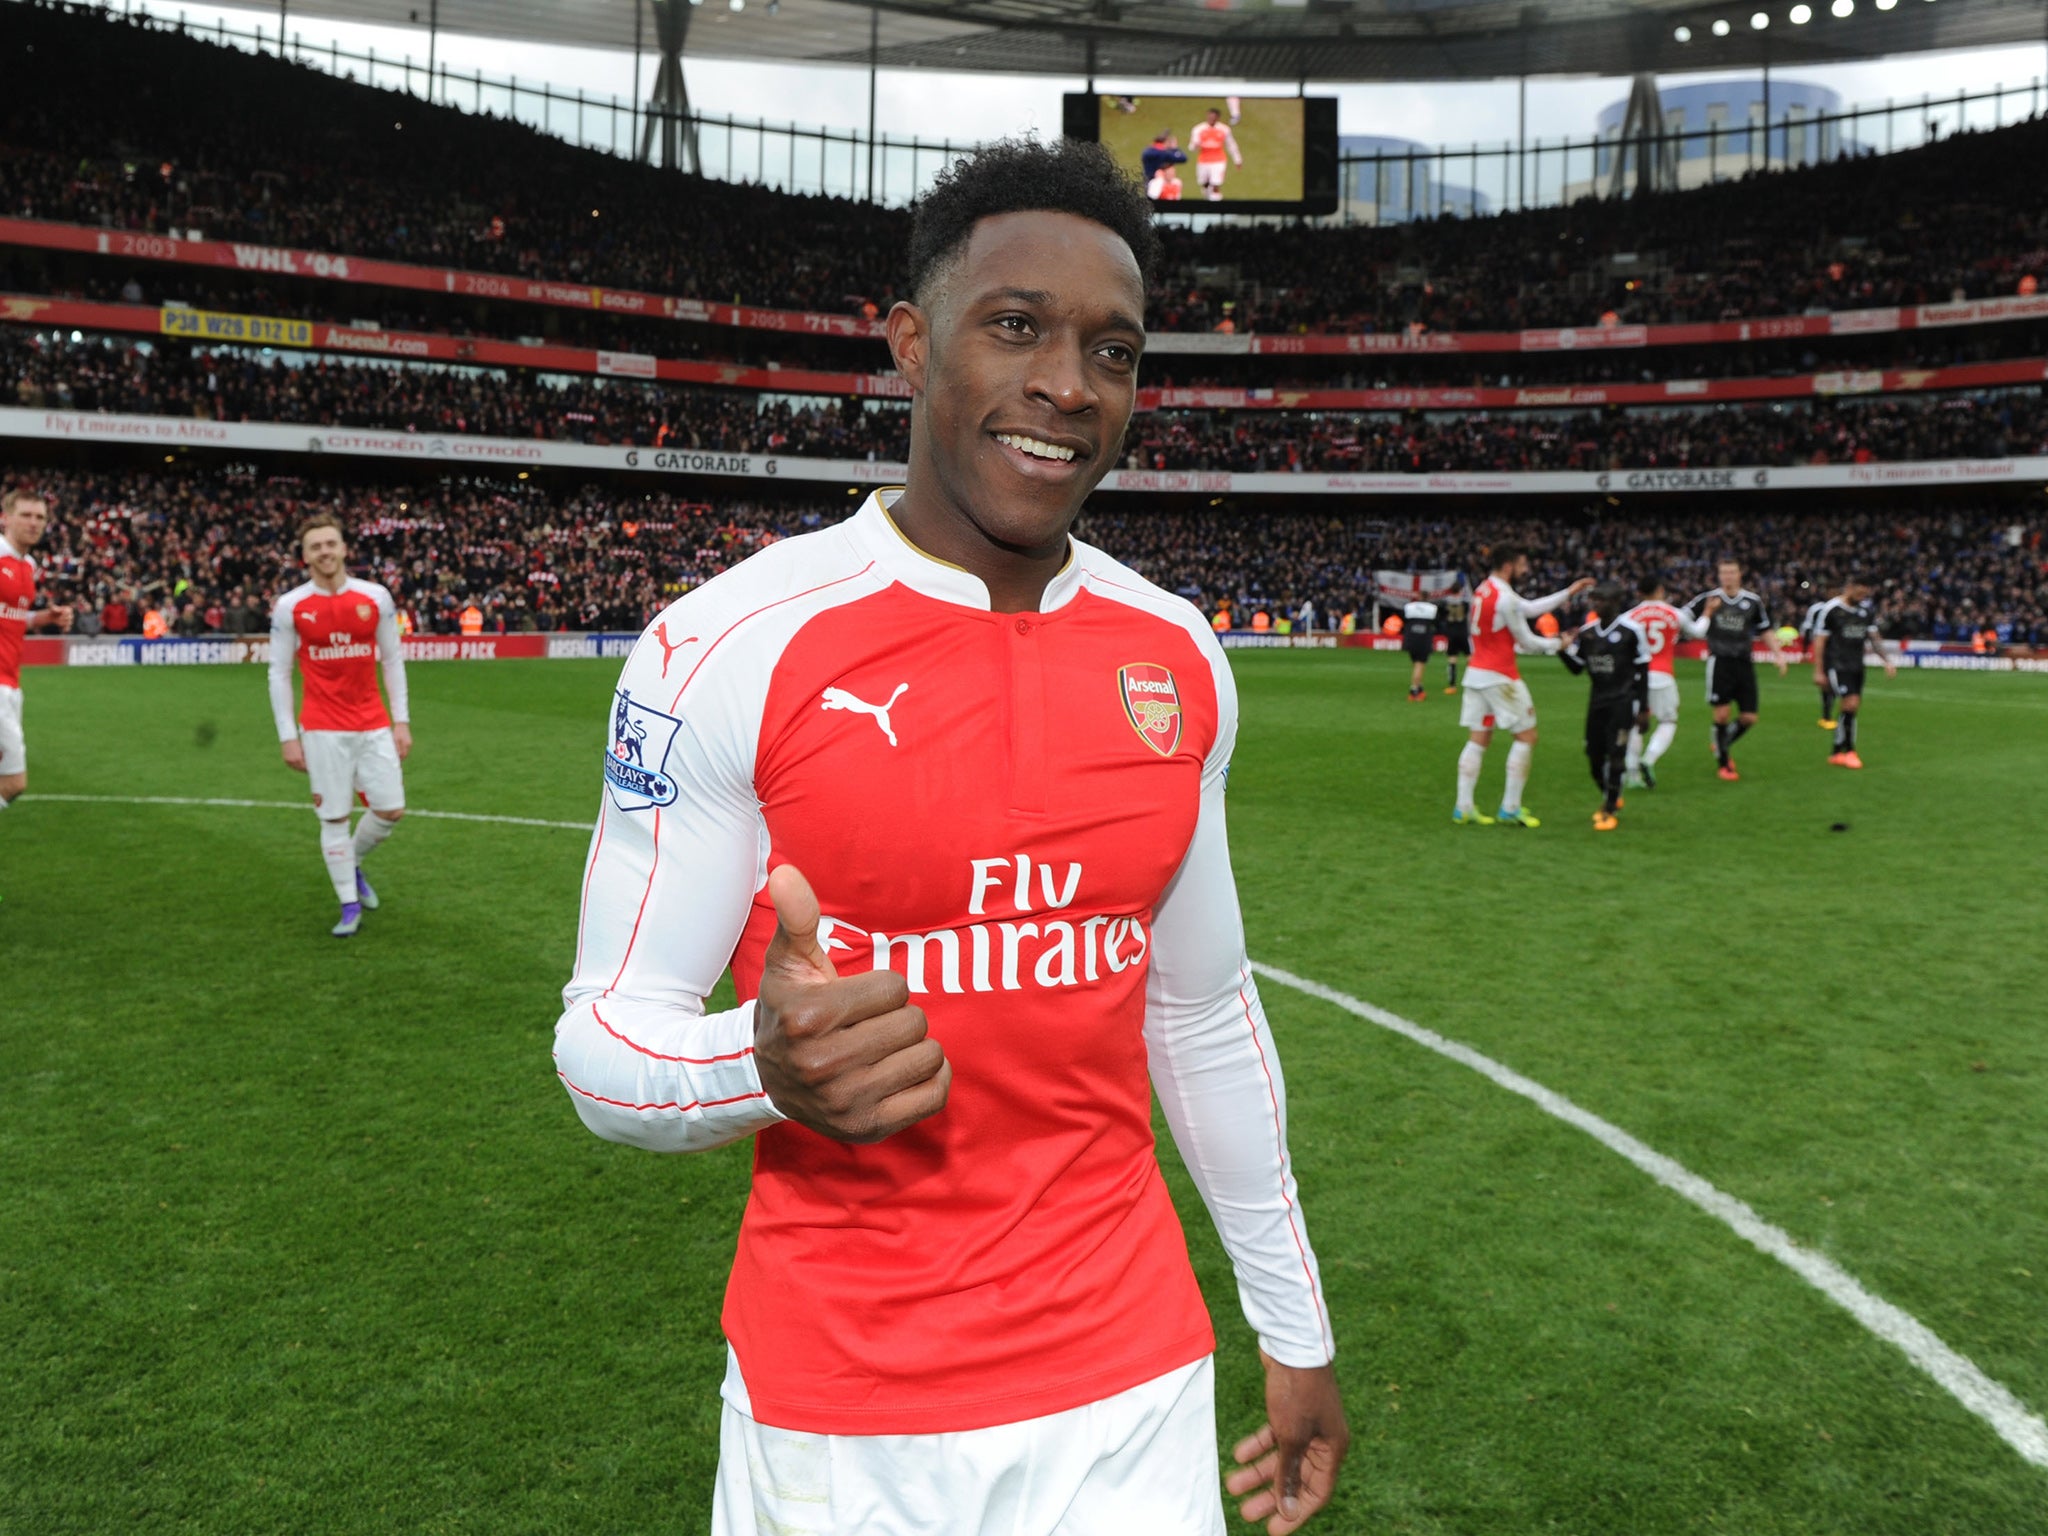 Danny Welbeck starts for Arsenal against Manchester United